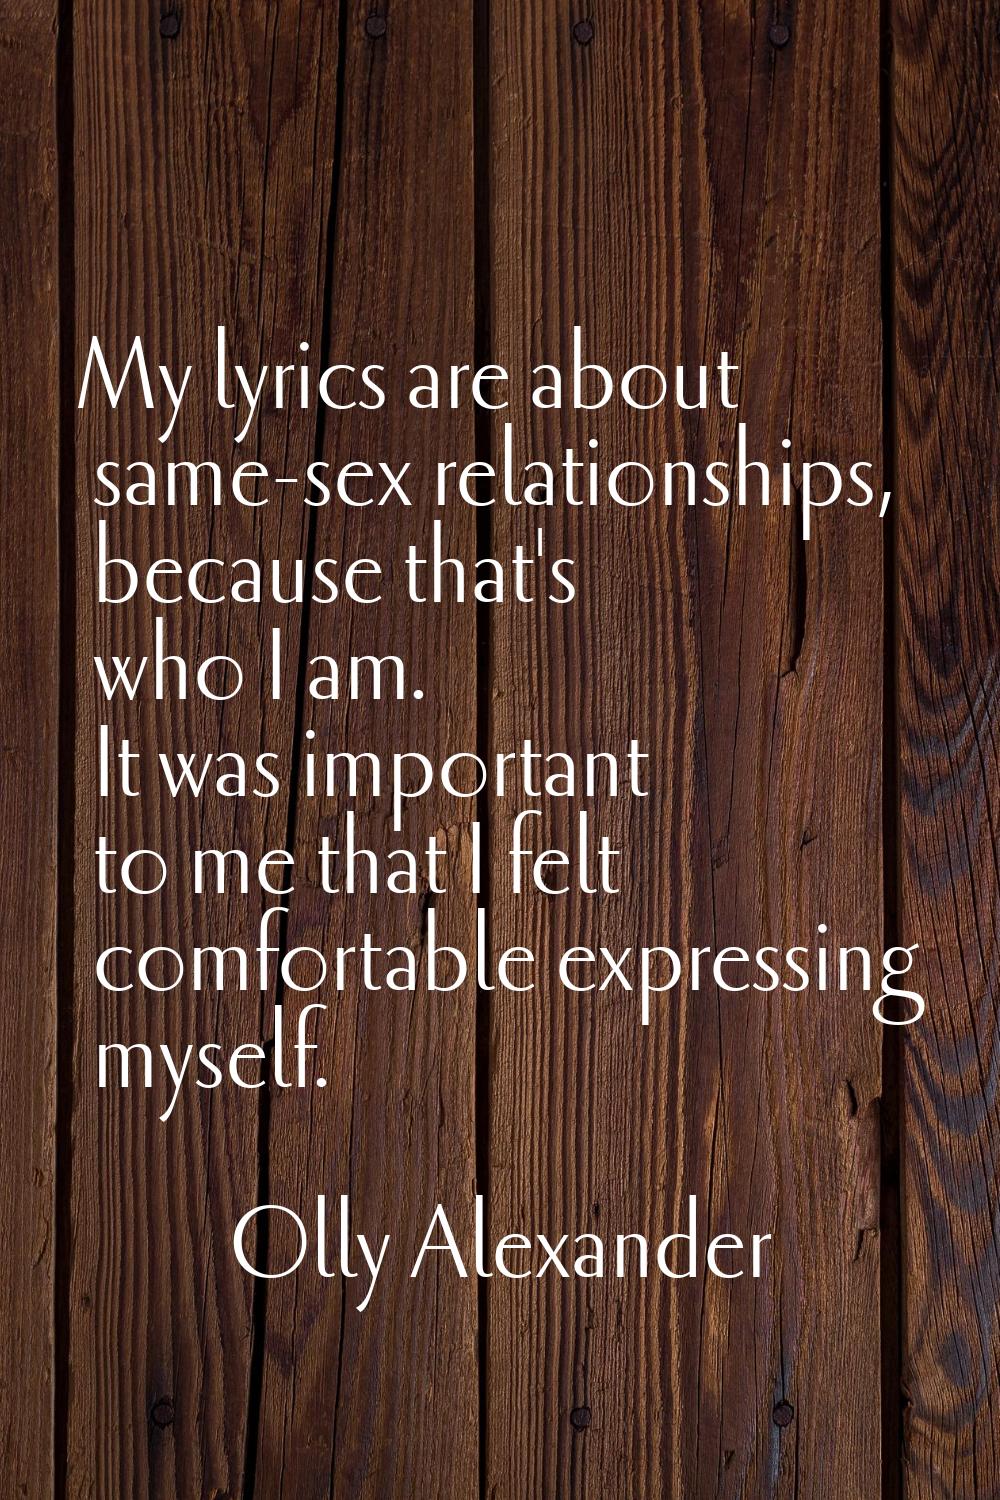 My lyrics are about same-sex relationships, because that's who I am. It was important to me that I 